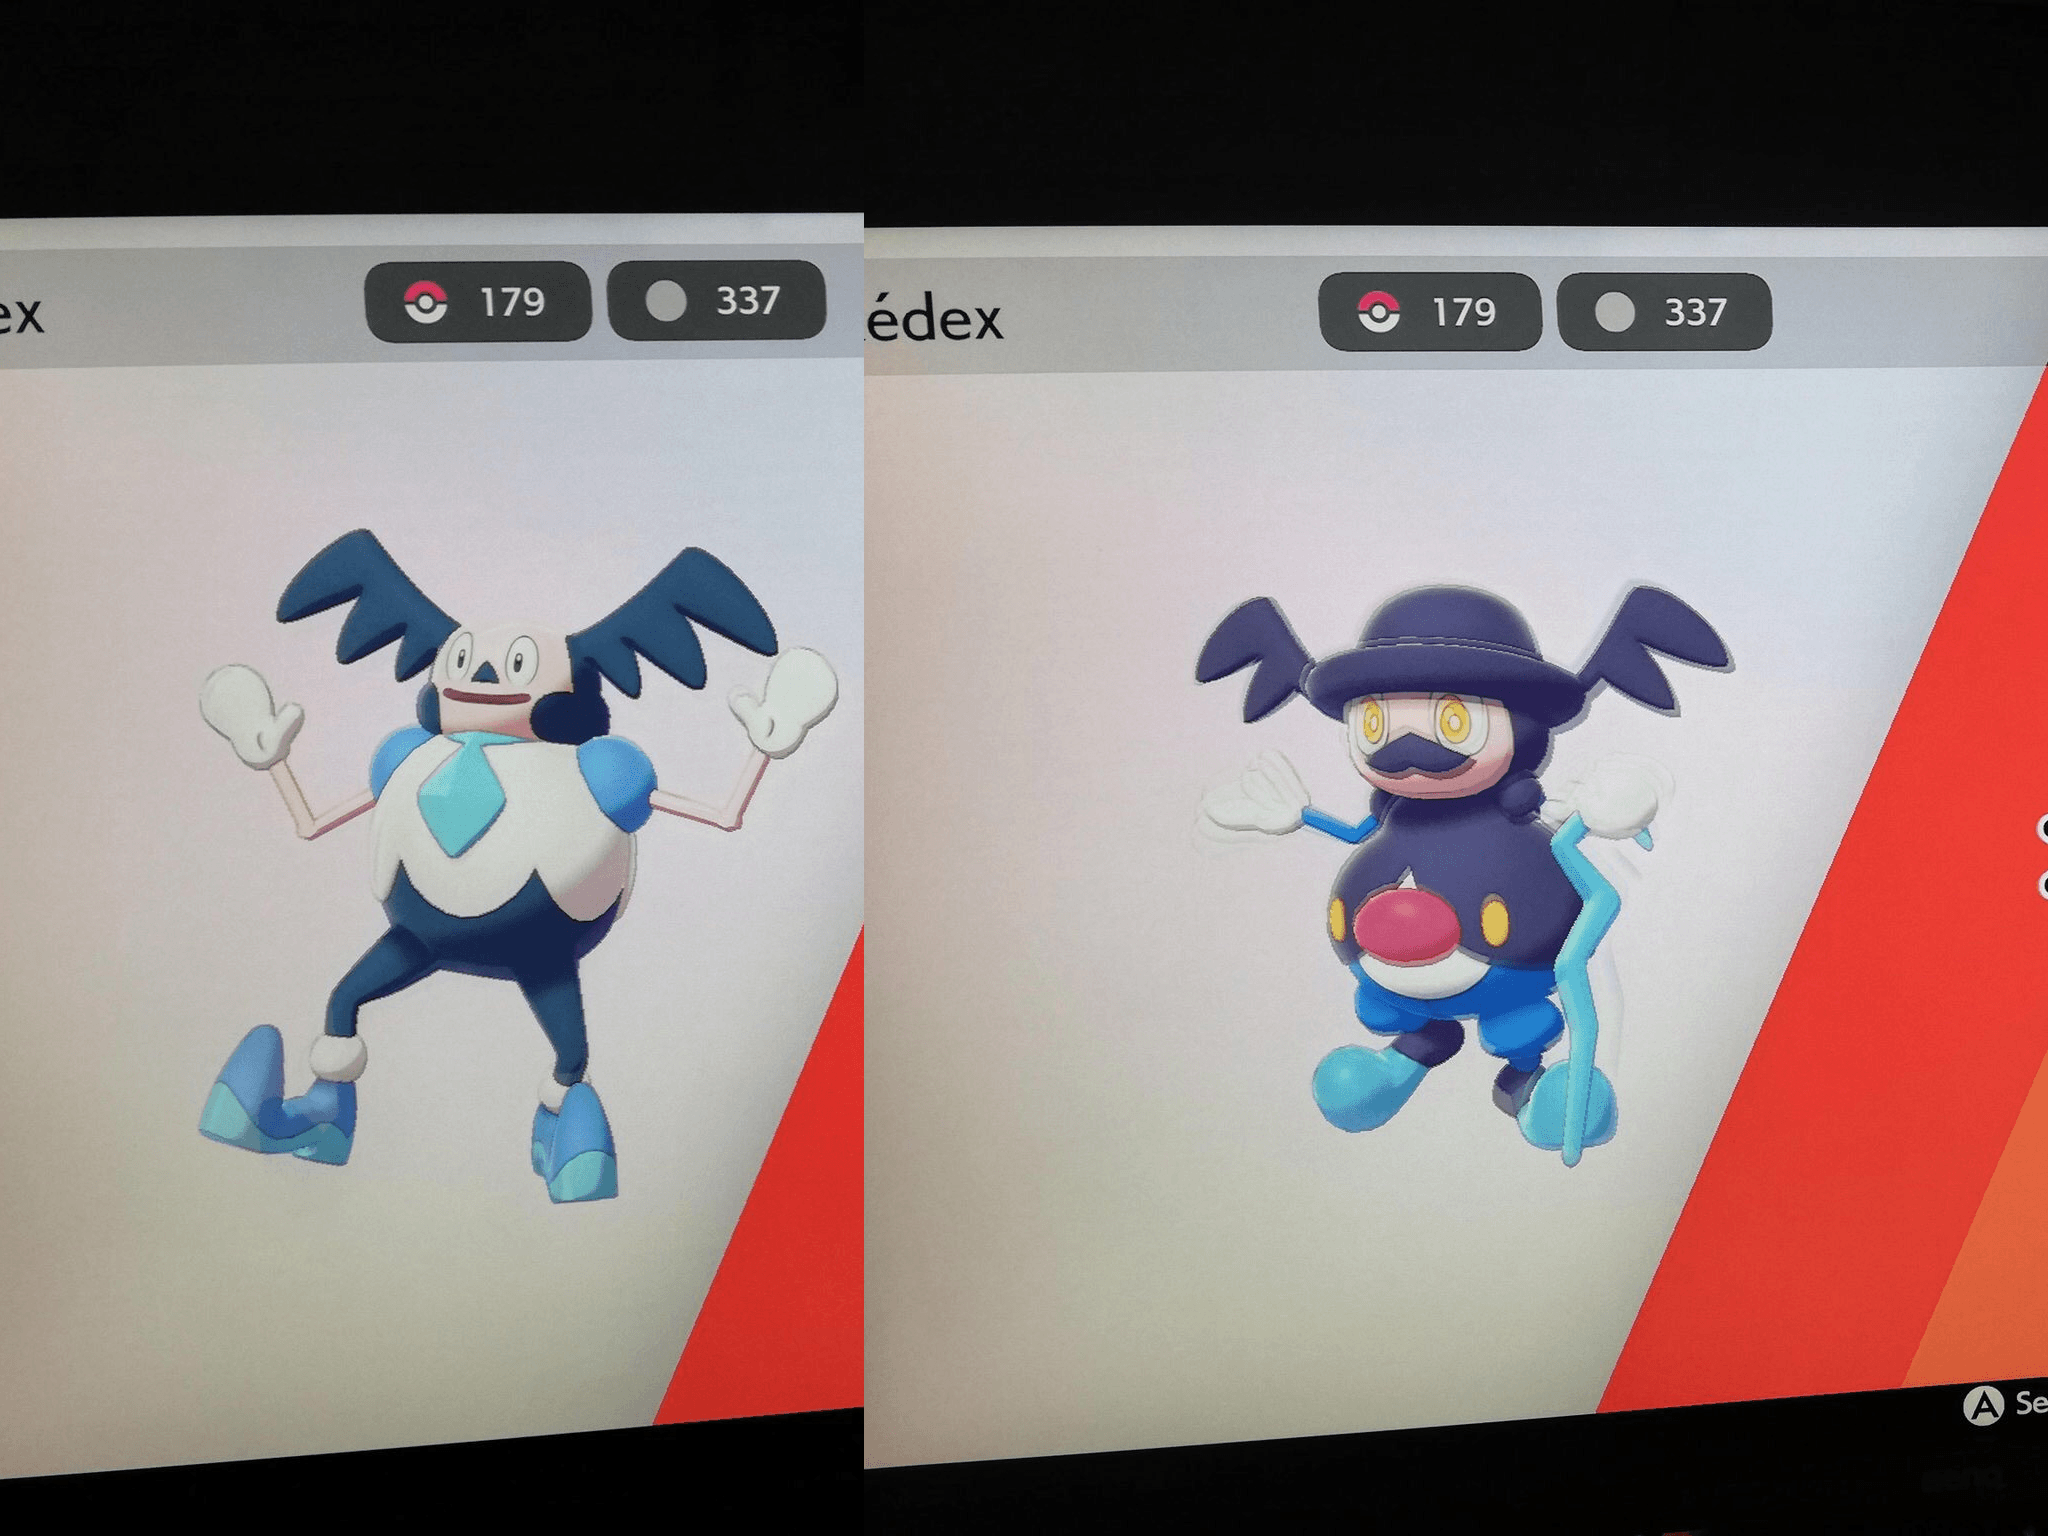 Galarian Mr. Mime and Mr. Rime. Pokémon Sword and Shield